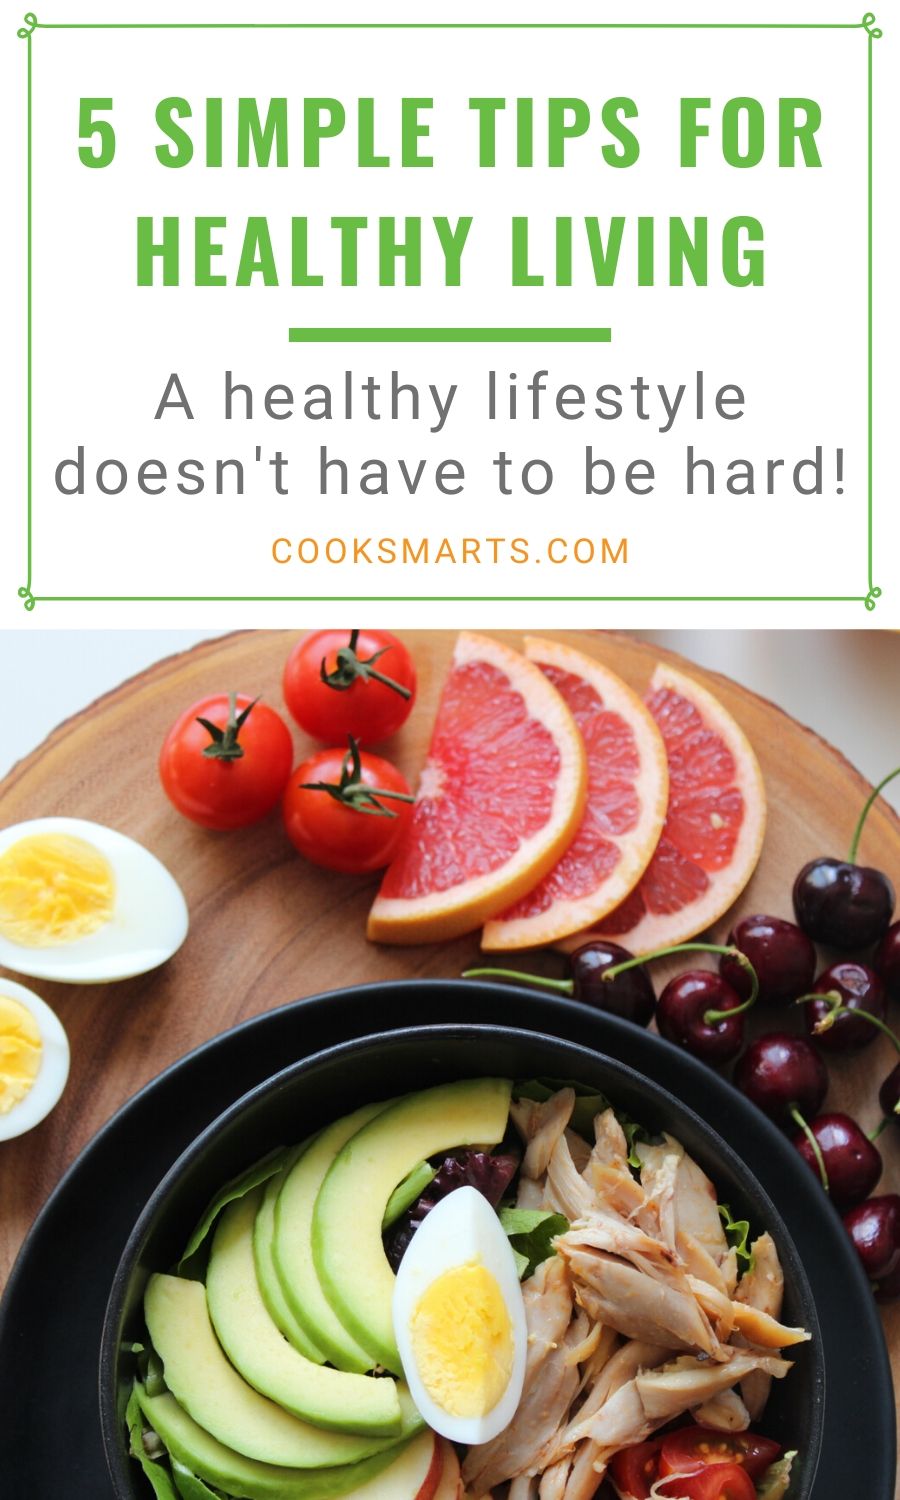 5 Ways to Make Your Health a Priority | Cook Smarts